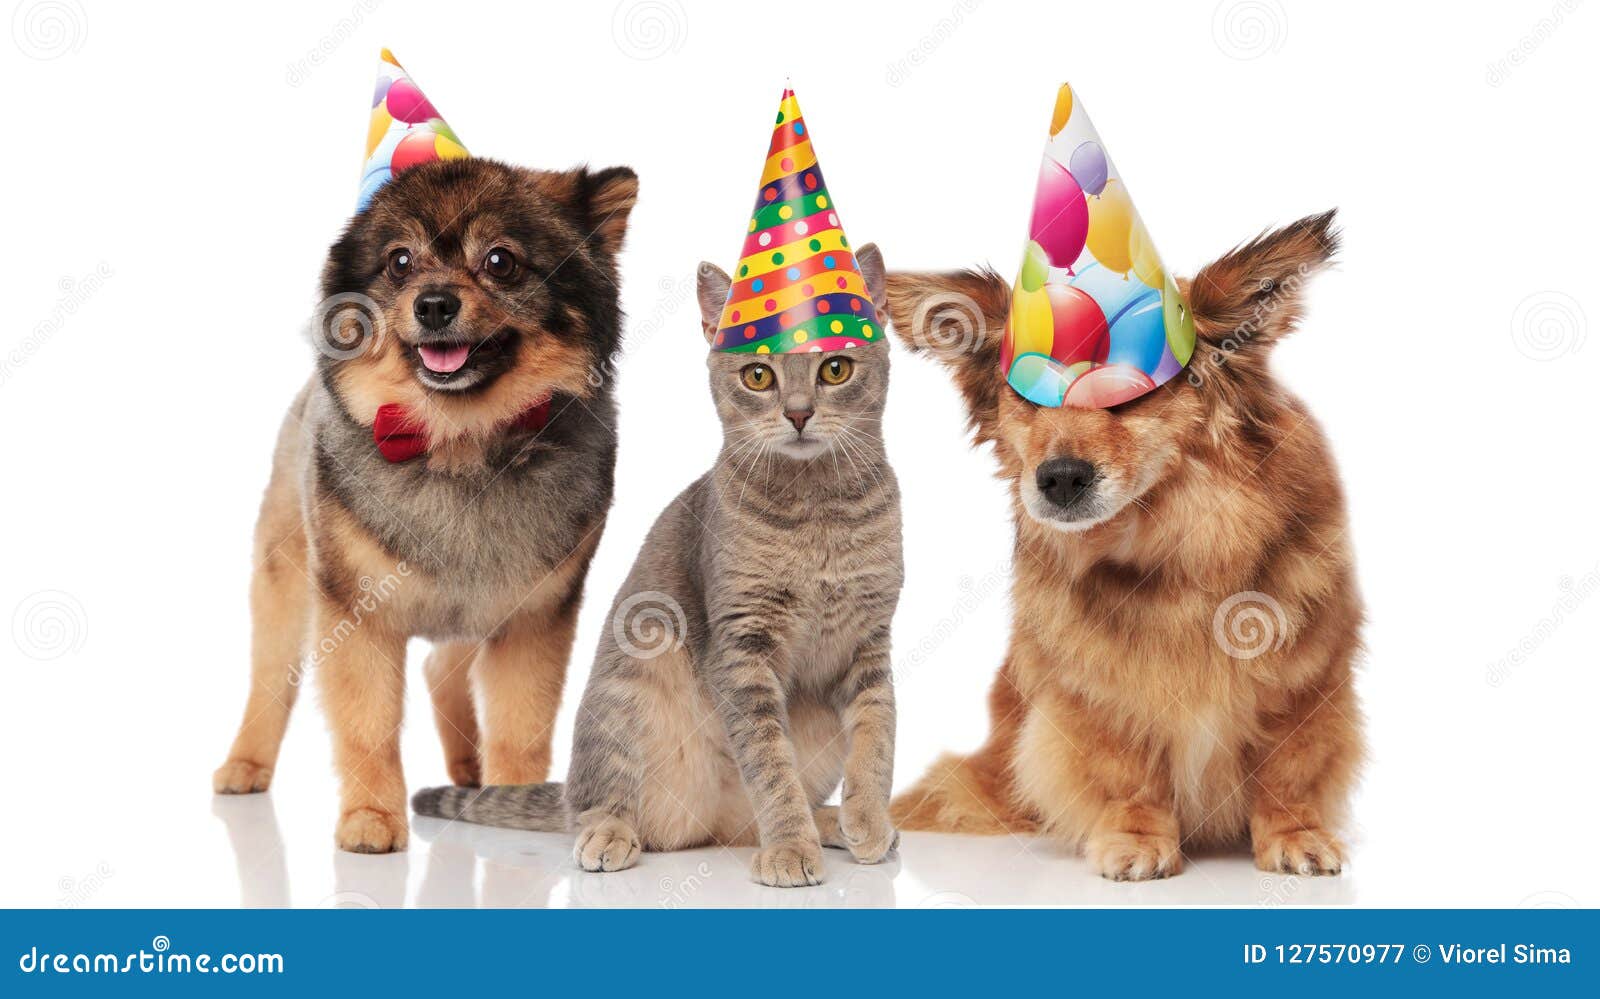 Funny Party Dogs and a Cat Wearing Birthday Caps Stock Image - Image of  eyes, isolated: 127570977